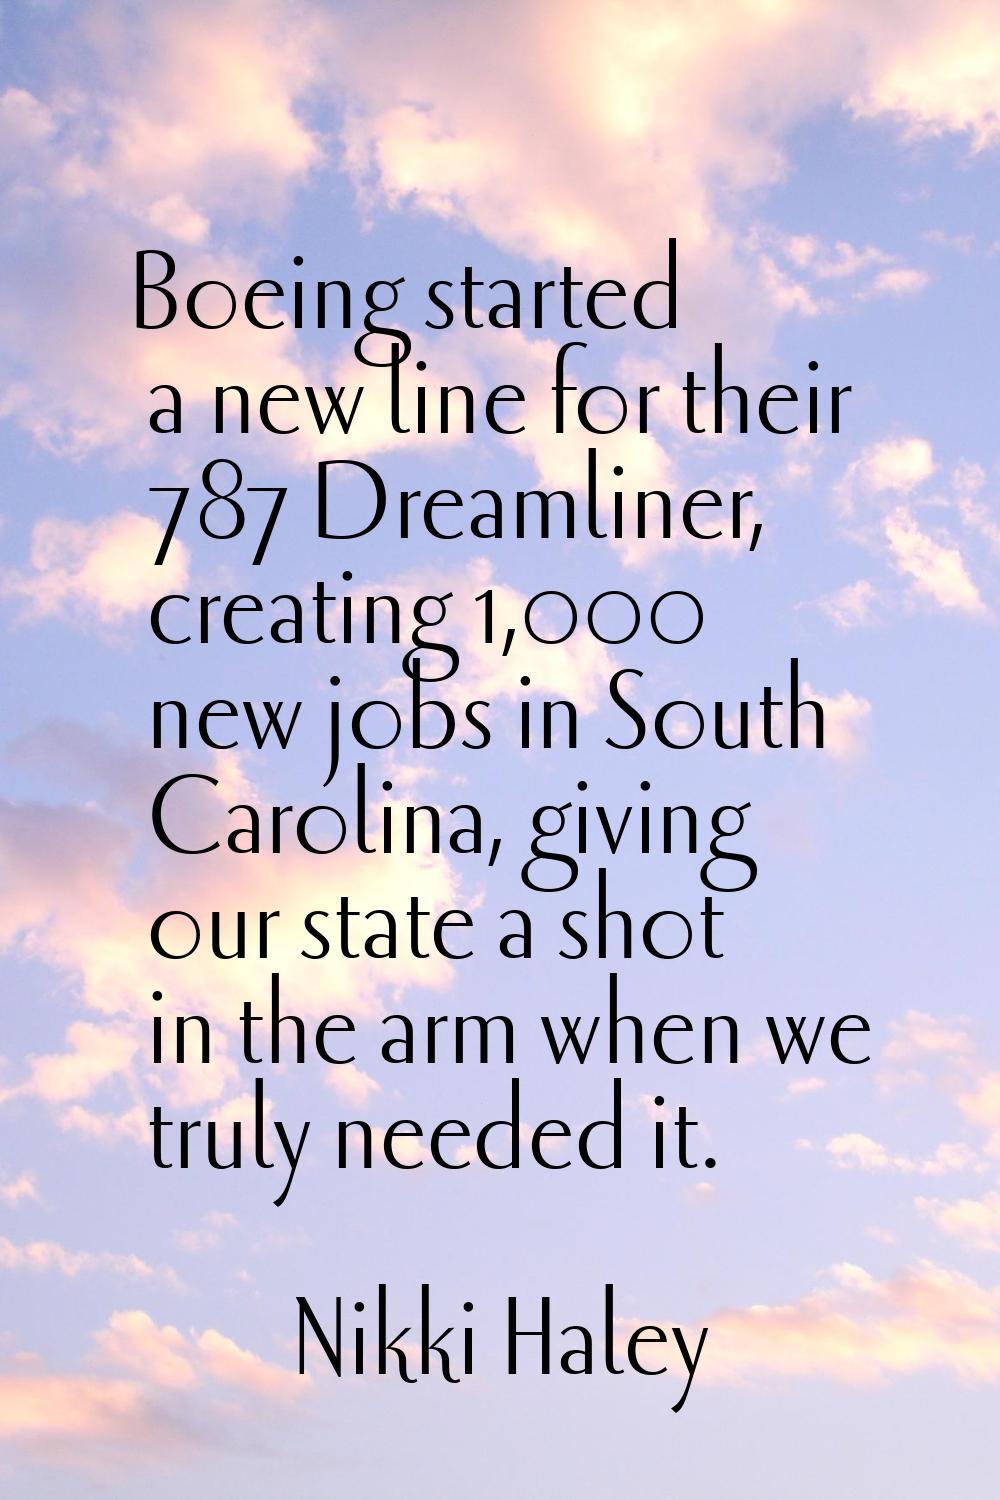 Boeing started a new line for their 787 Dreamliner, creating 1,000 new jobs in South Carolina, givi